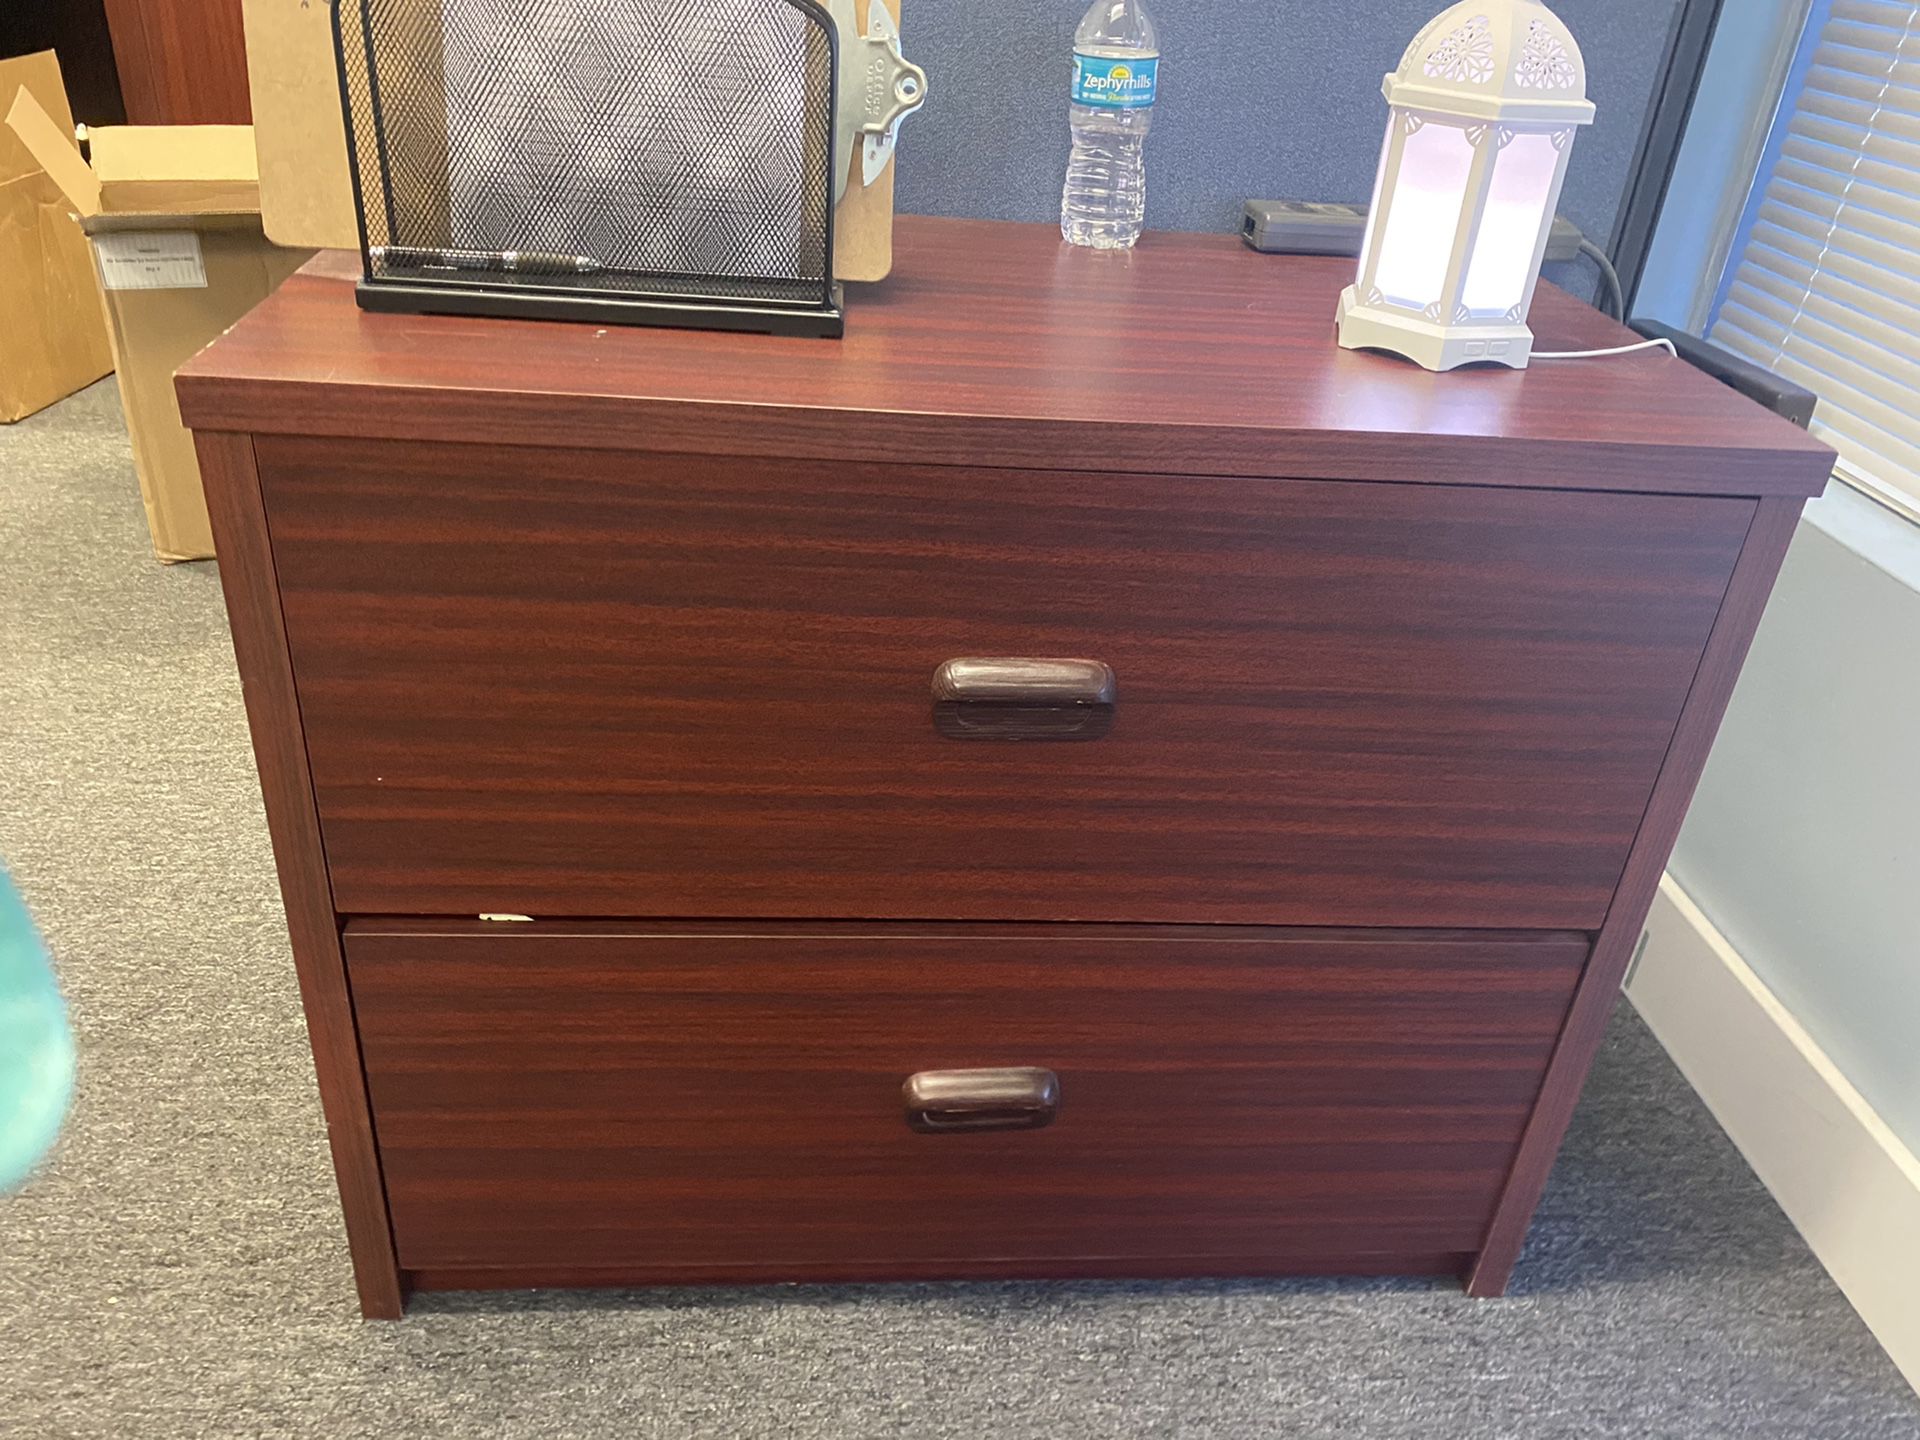 2 cherry wood file cabinets